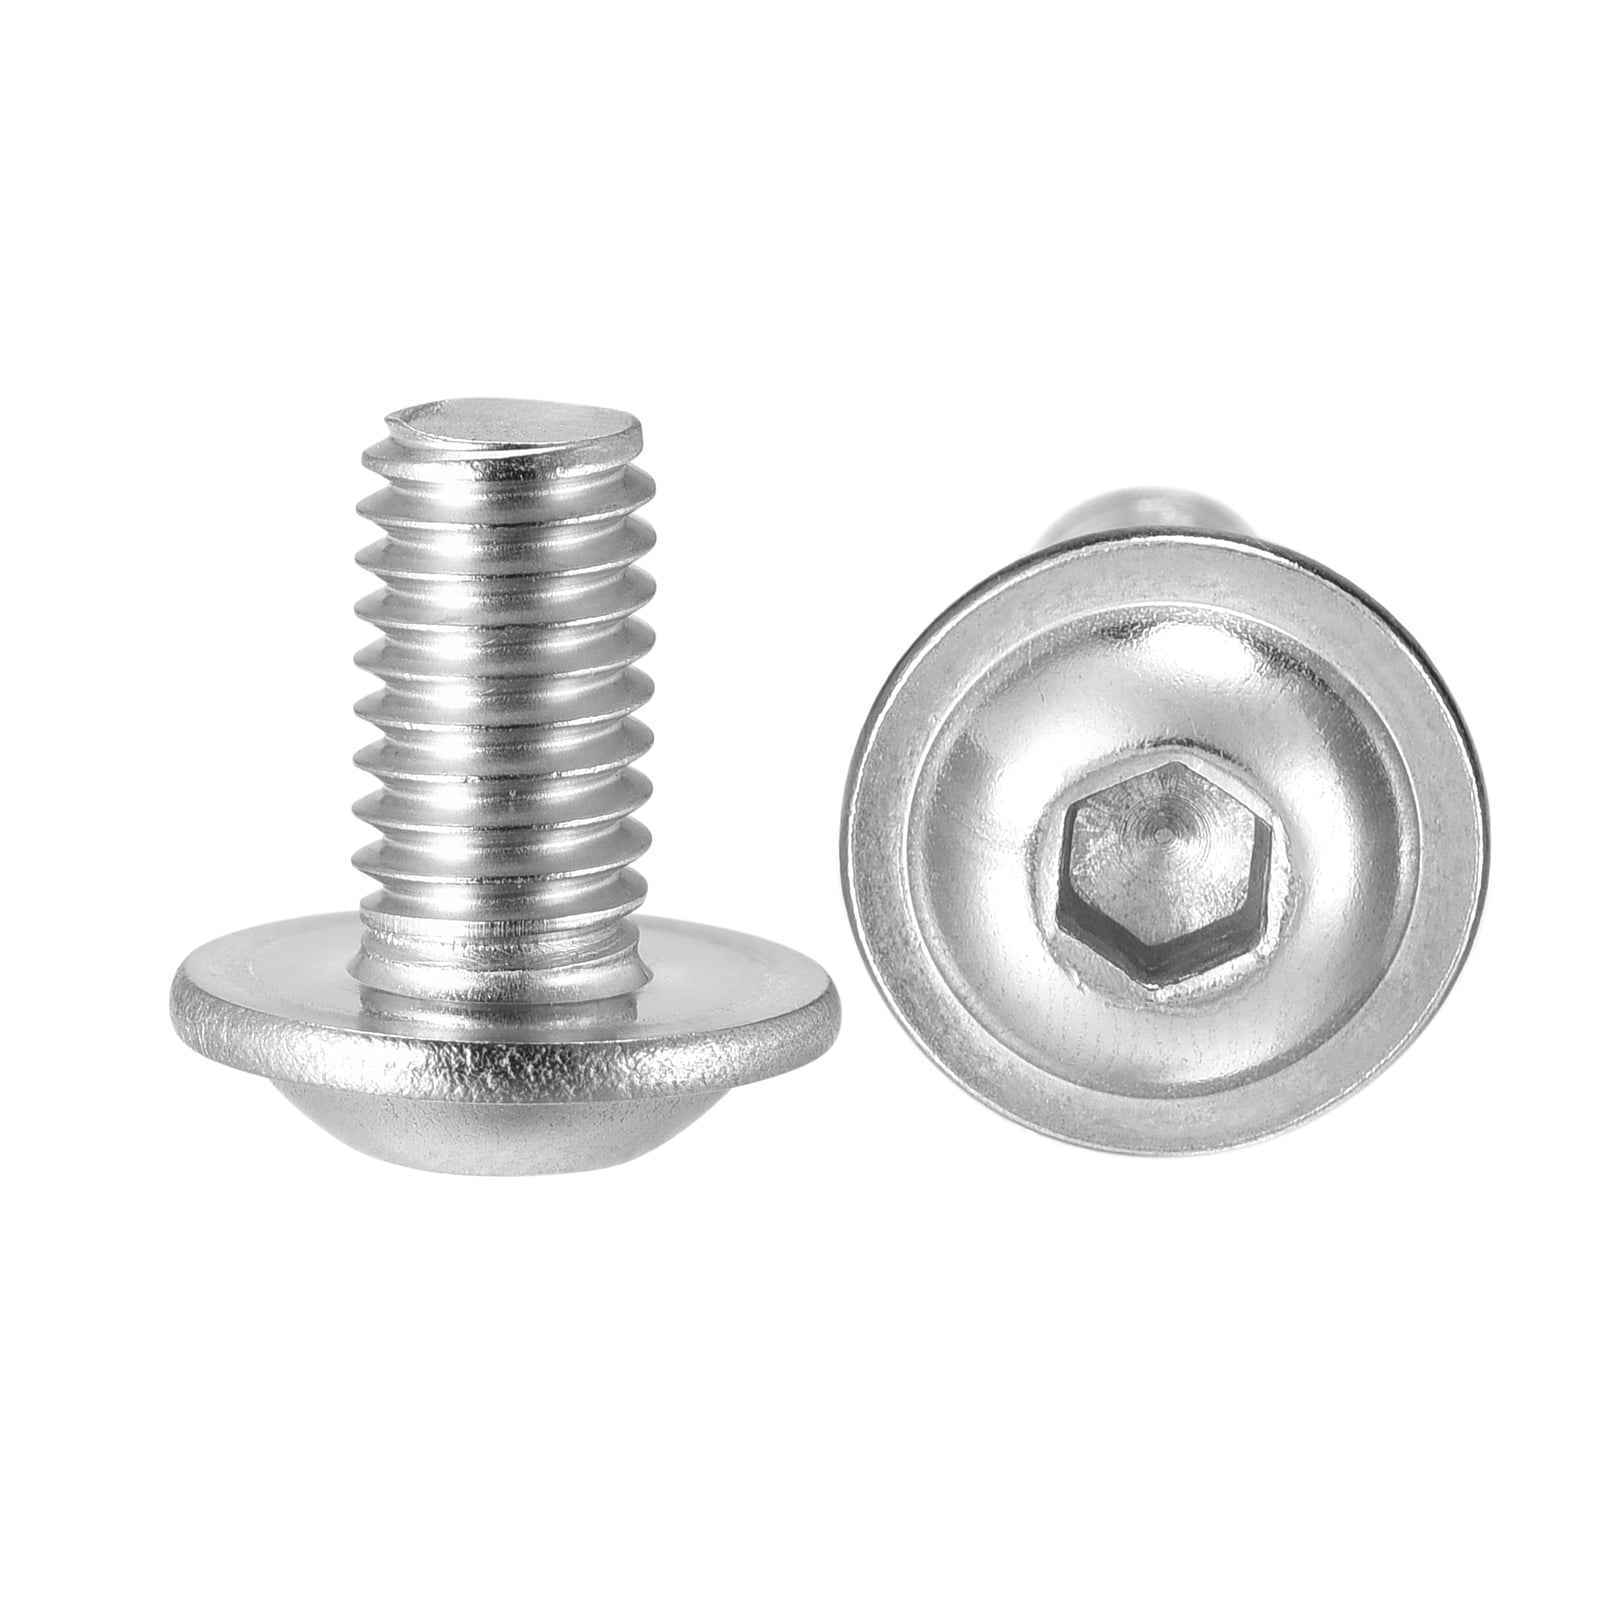 Hex Allen Socket Screws A2 Stainless Steel M5 or M6 Flanged Button Head Bolts 